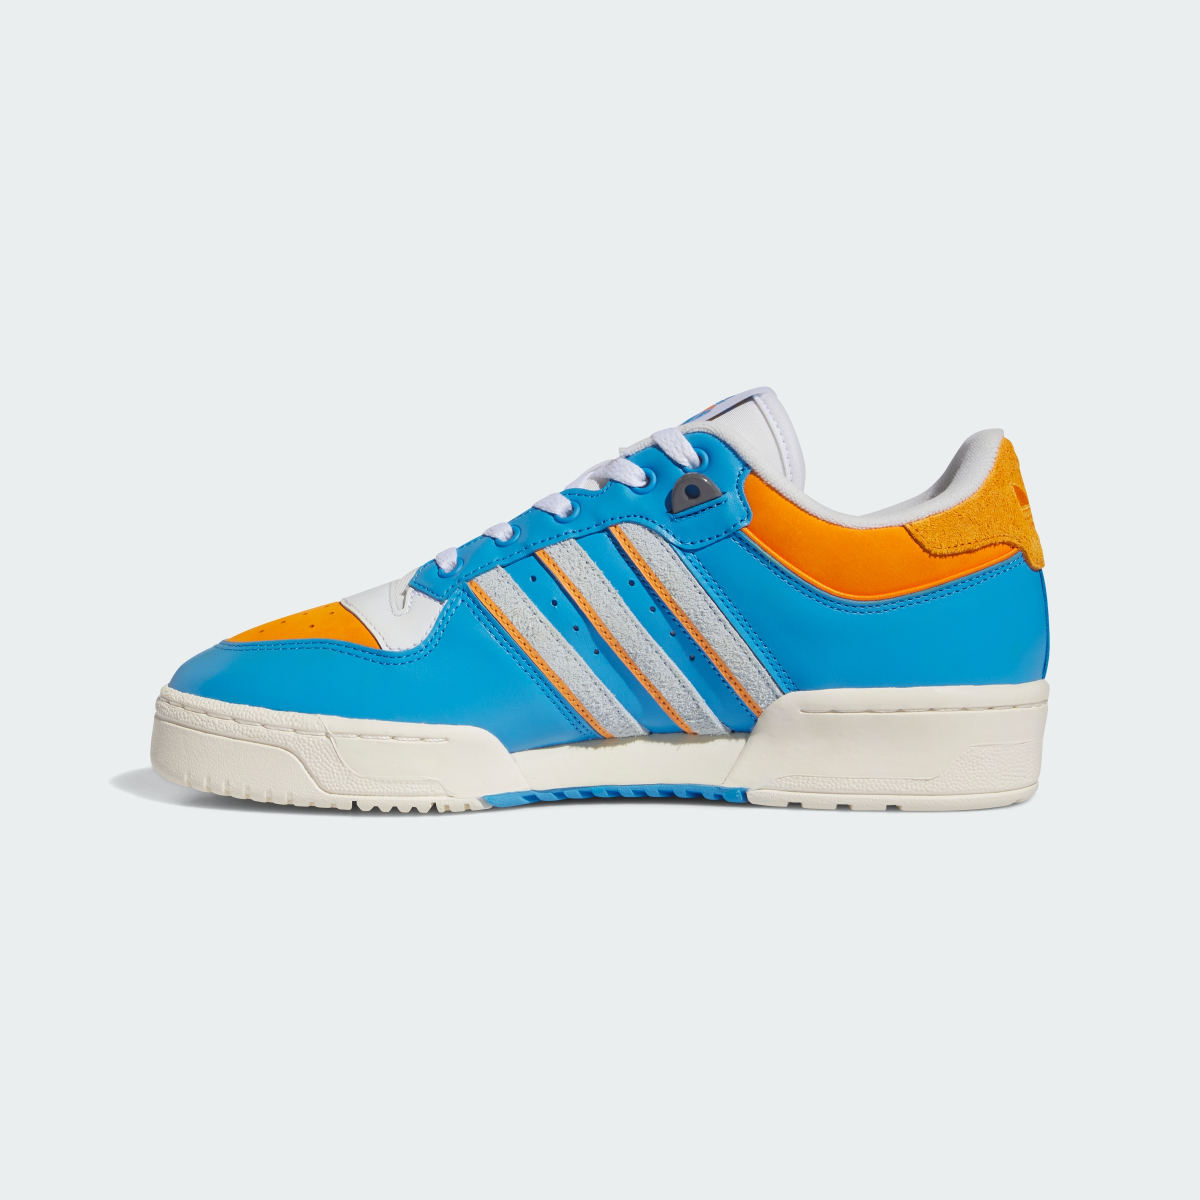 Adidas Sapatilhas adidas Rivalry Low Itchy. 9